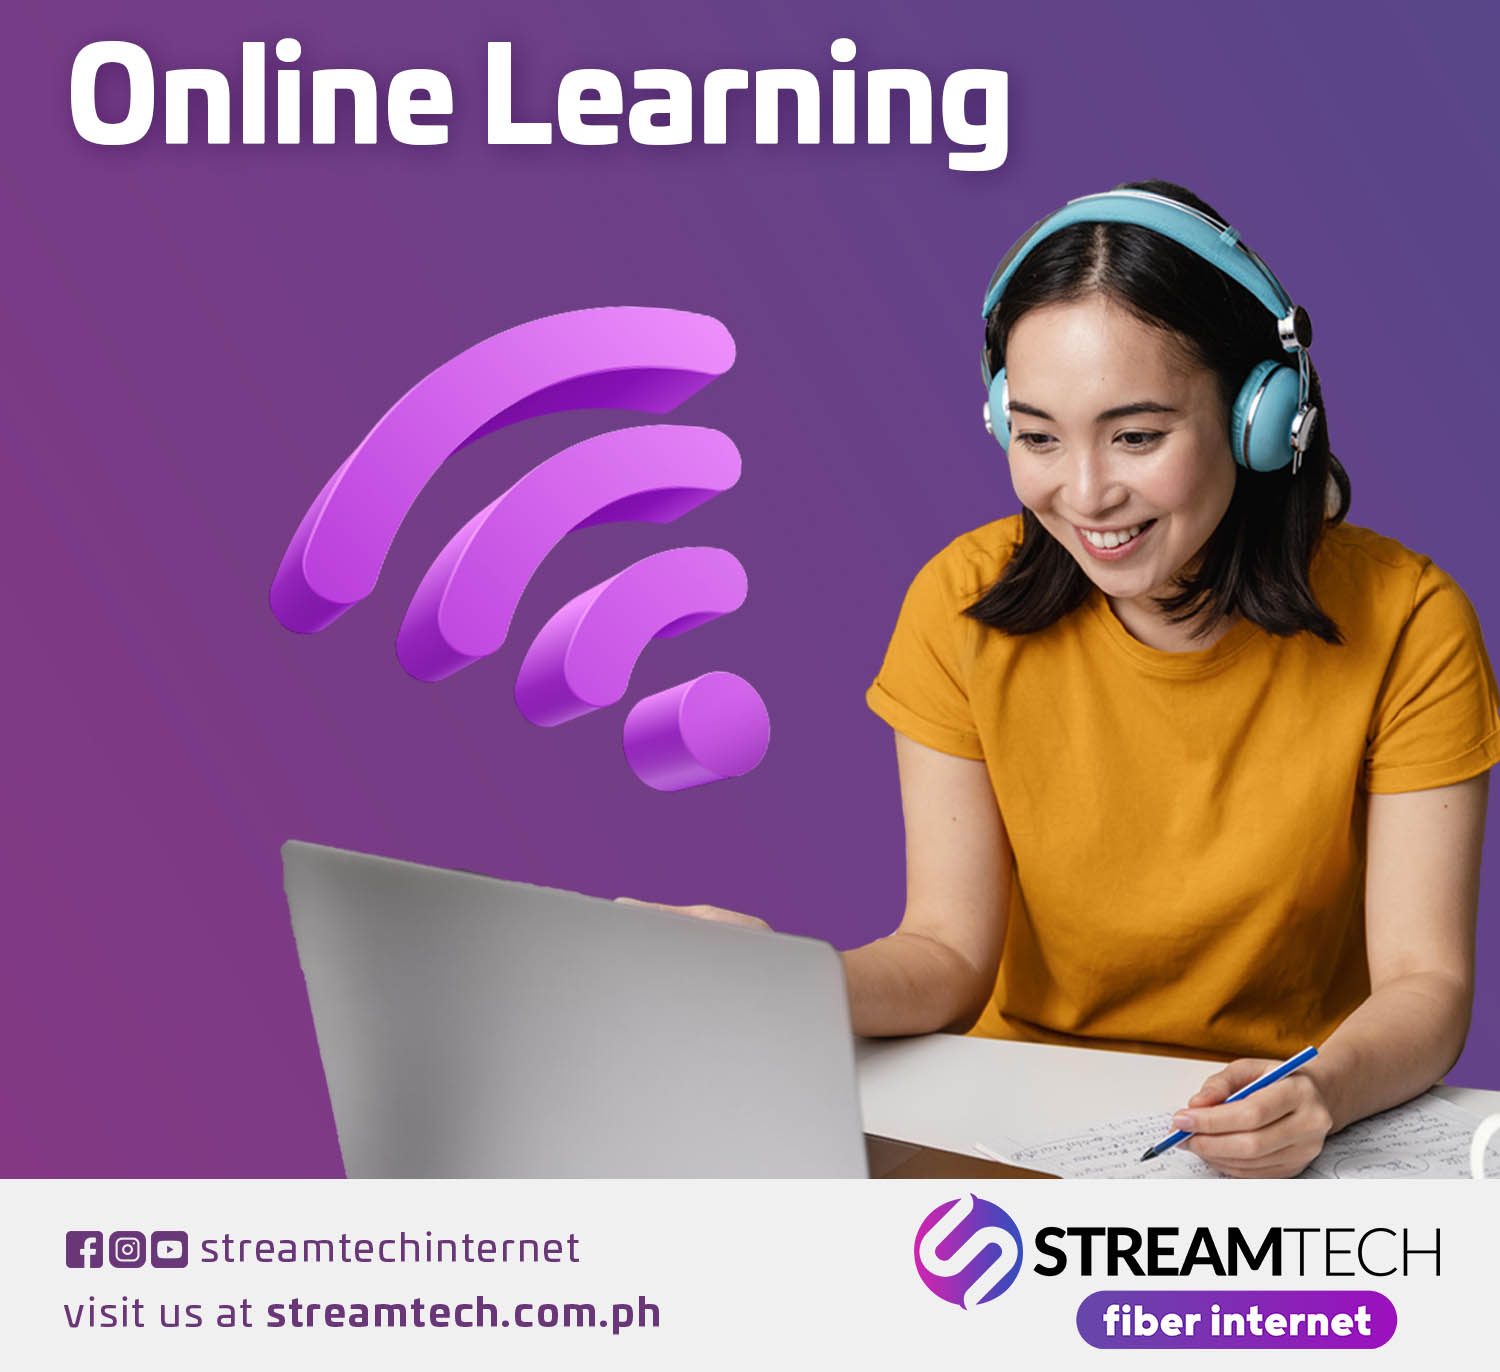 Get Streamtech as Your Back-to-School Partner